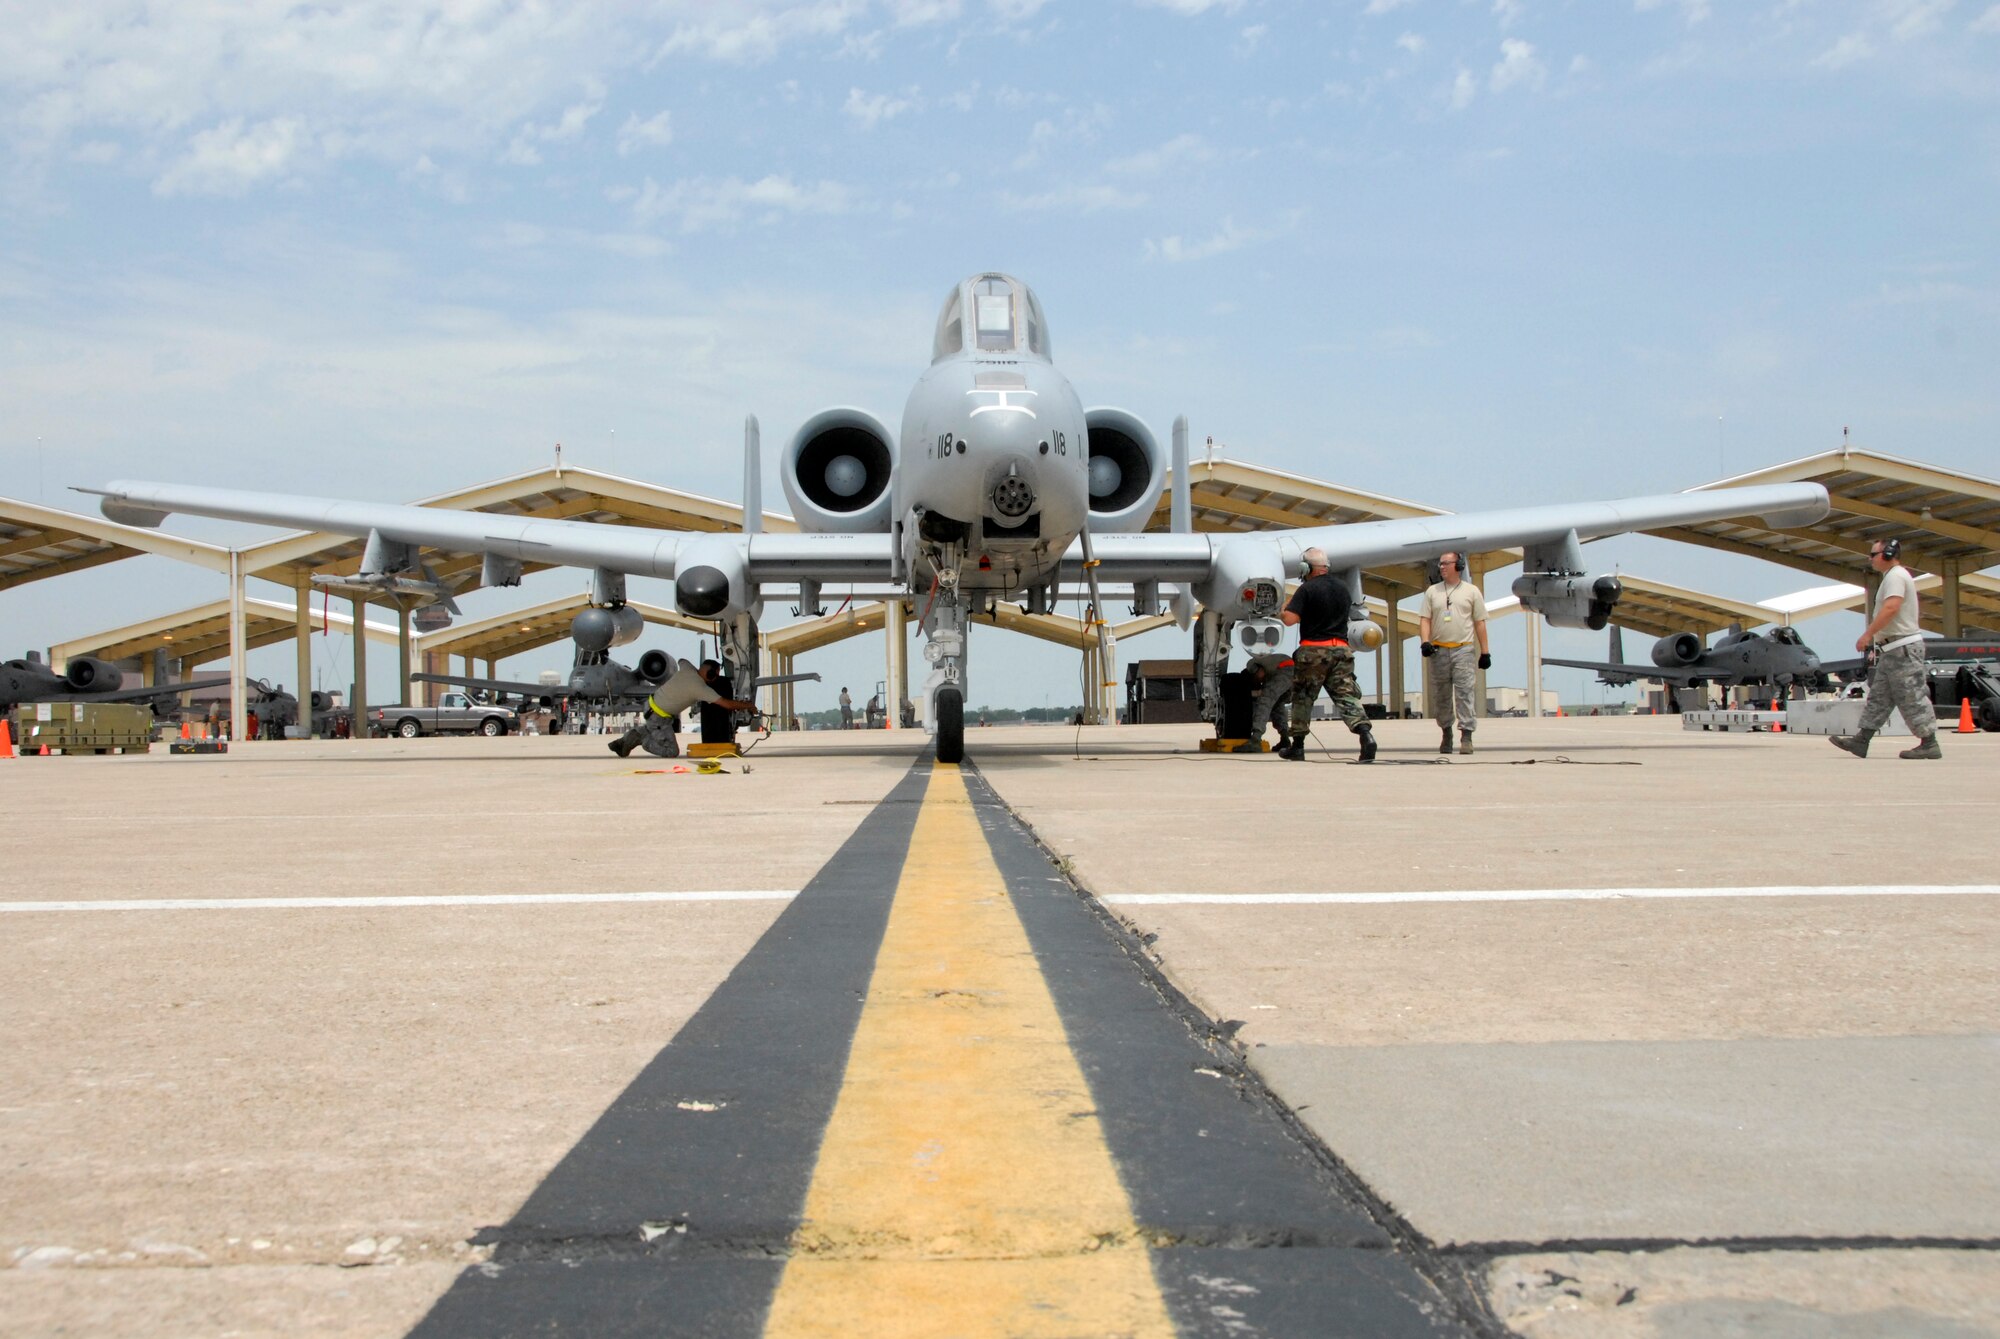 Maintenance crews from the 442nd Fighter Wing's 442nd Maintenance Group prepare an A-10 for flight July 12, 2009, during an exercise to practice for the wing's upcoming operational readiness inspection in October.  In a program initiated by the 442nd Chaplain's office, wing members will be able to offer up prayers for A-10 pilots and ground crews to help fly the required number of sorties during the inspection.  (U.S. Air Force photo/Staff Sgt. Kent Kagarise)